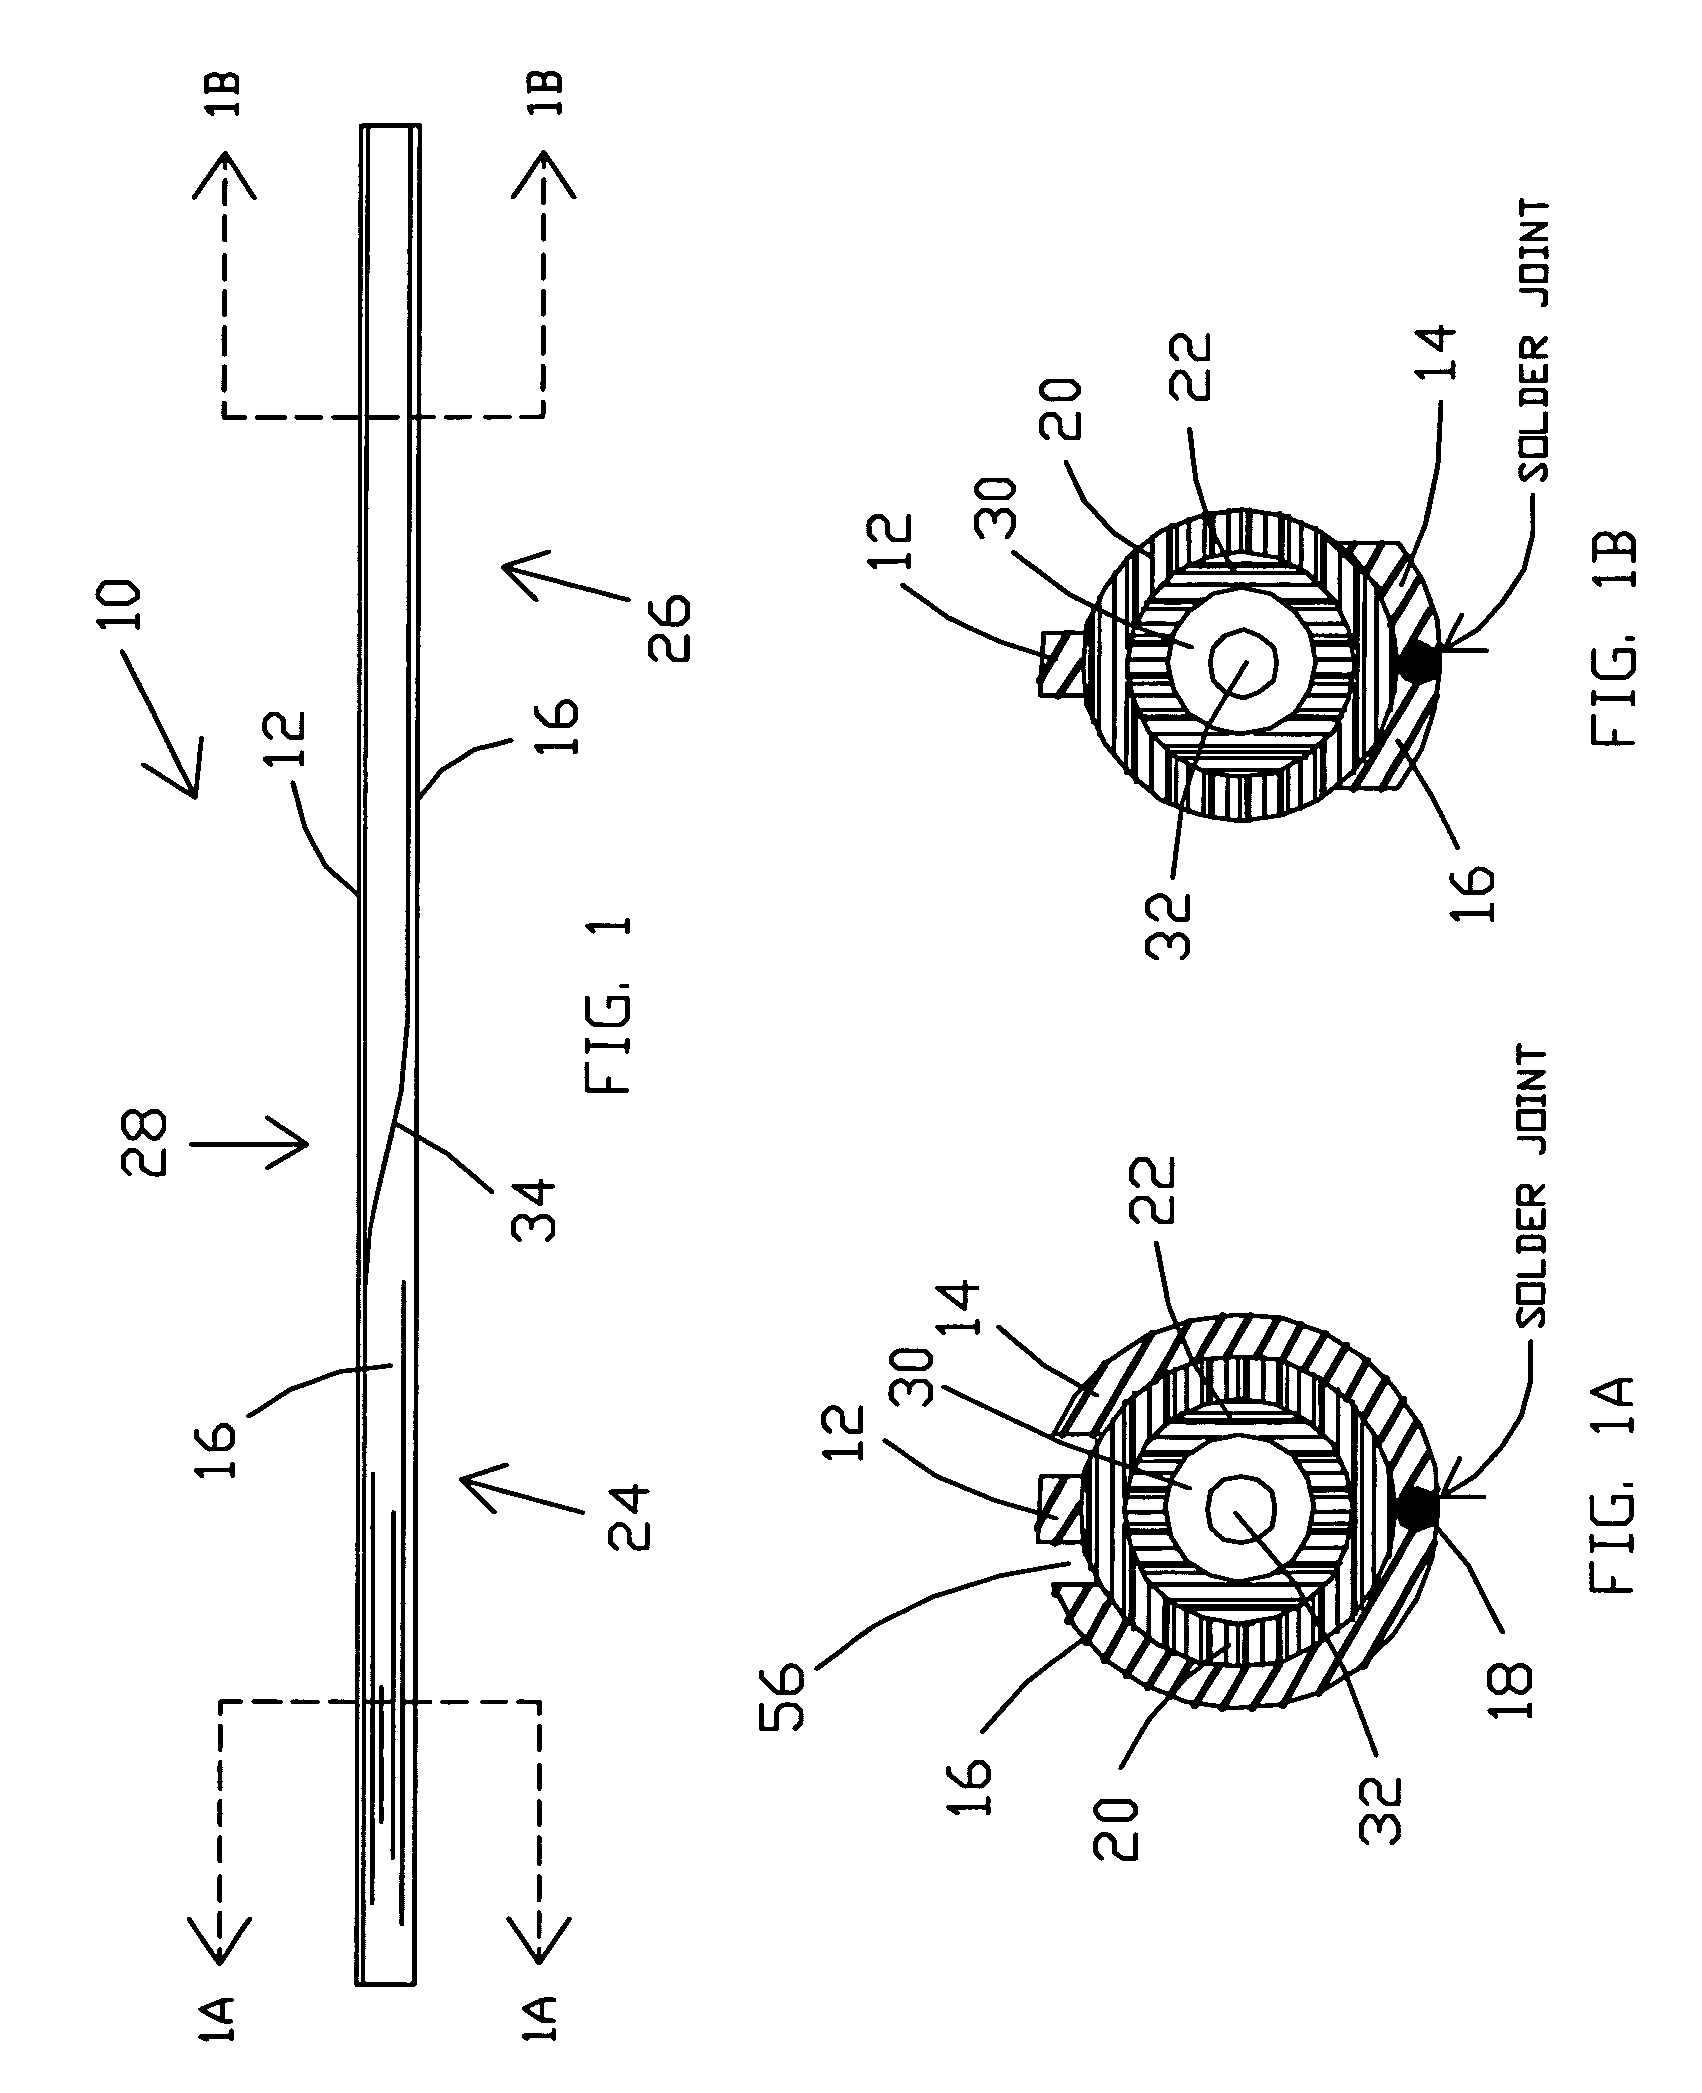 Directional microwave applicator and methods